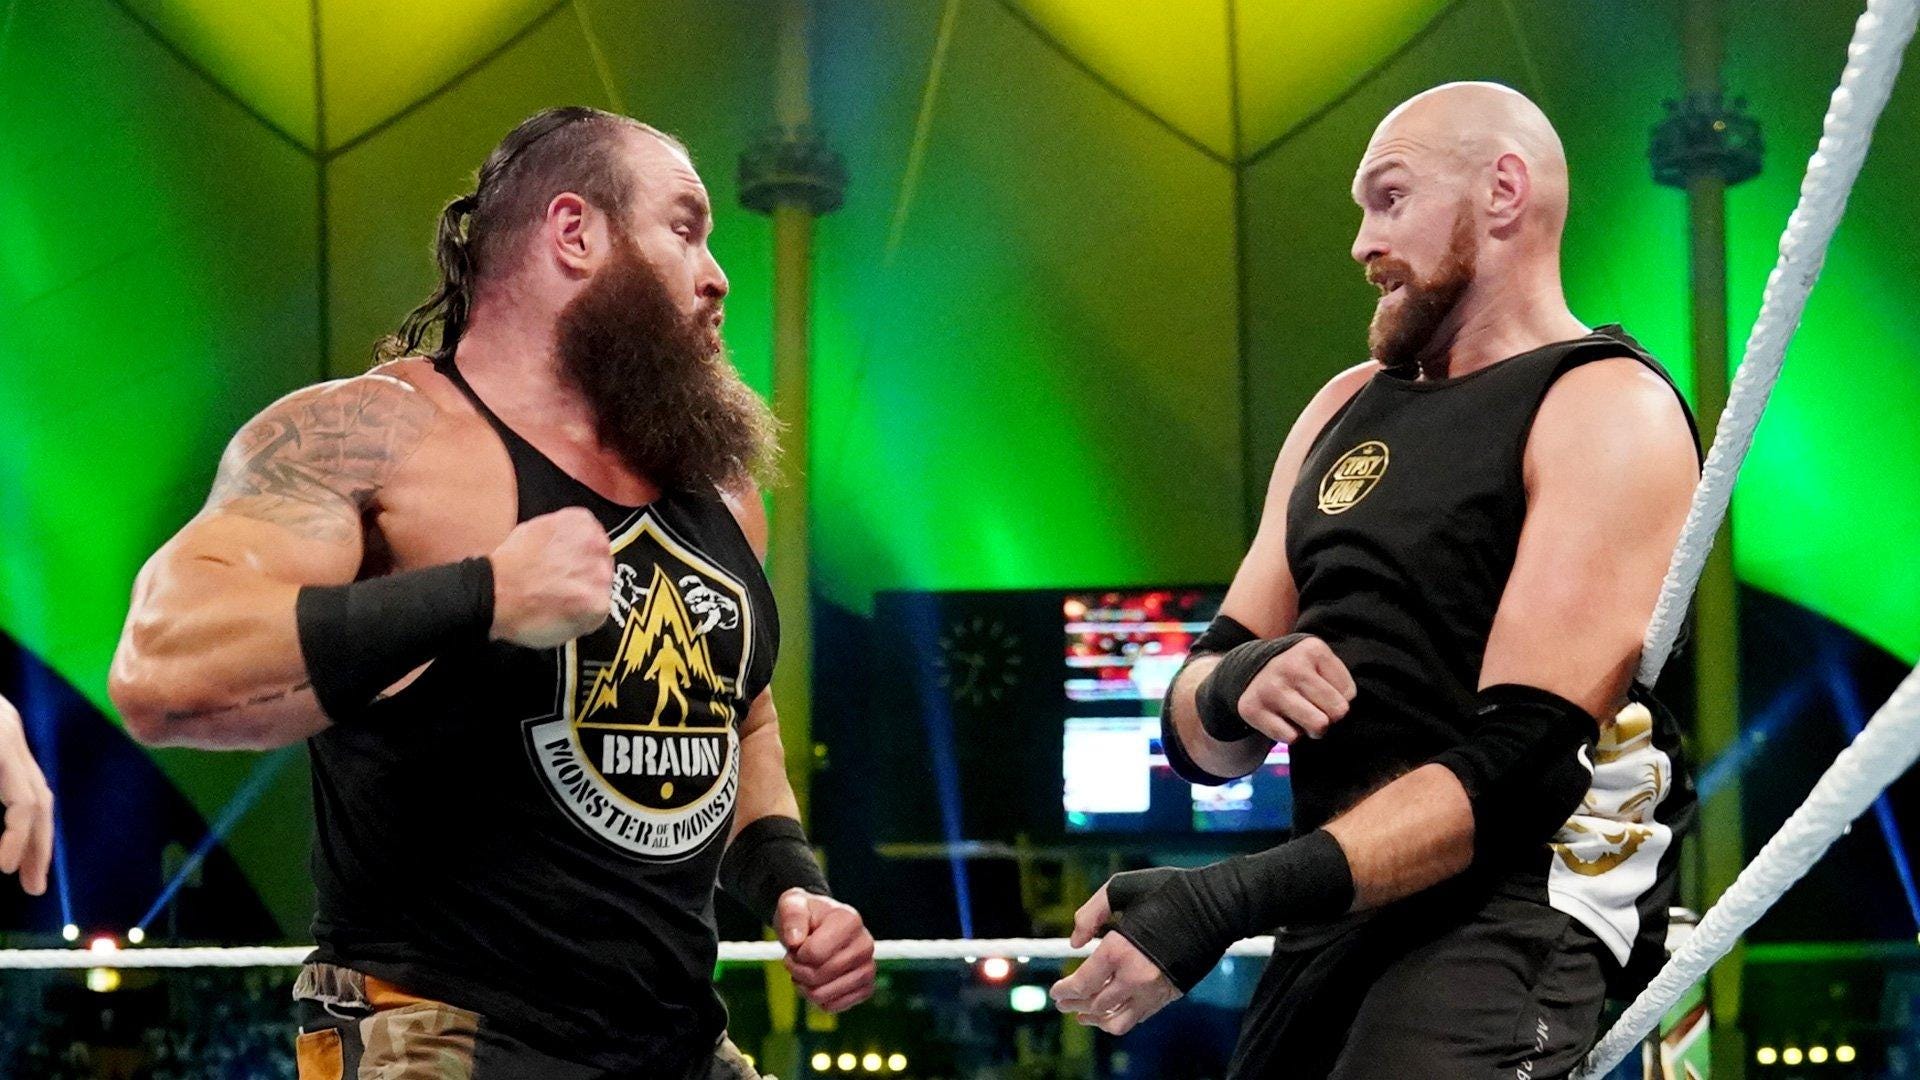 Heres a firsthand account of the hostage incident after WWE Crown Jewel 2019